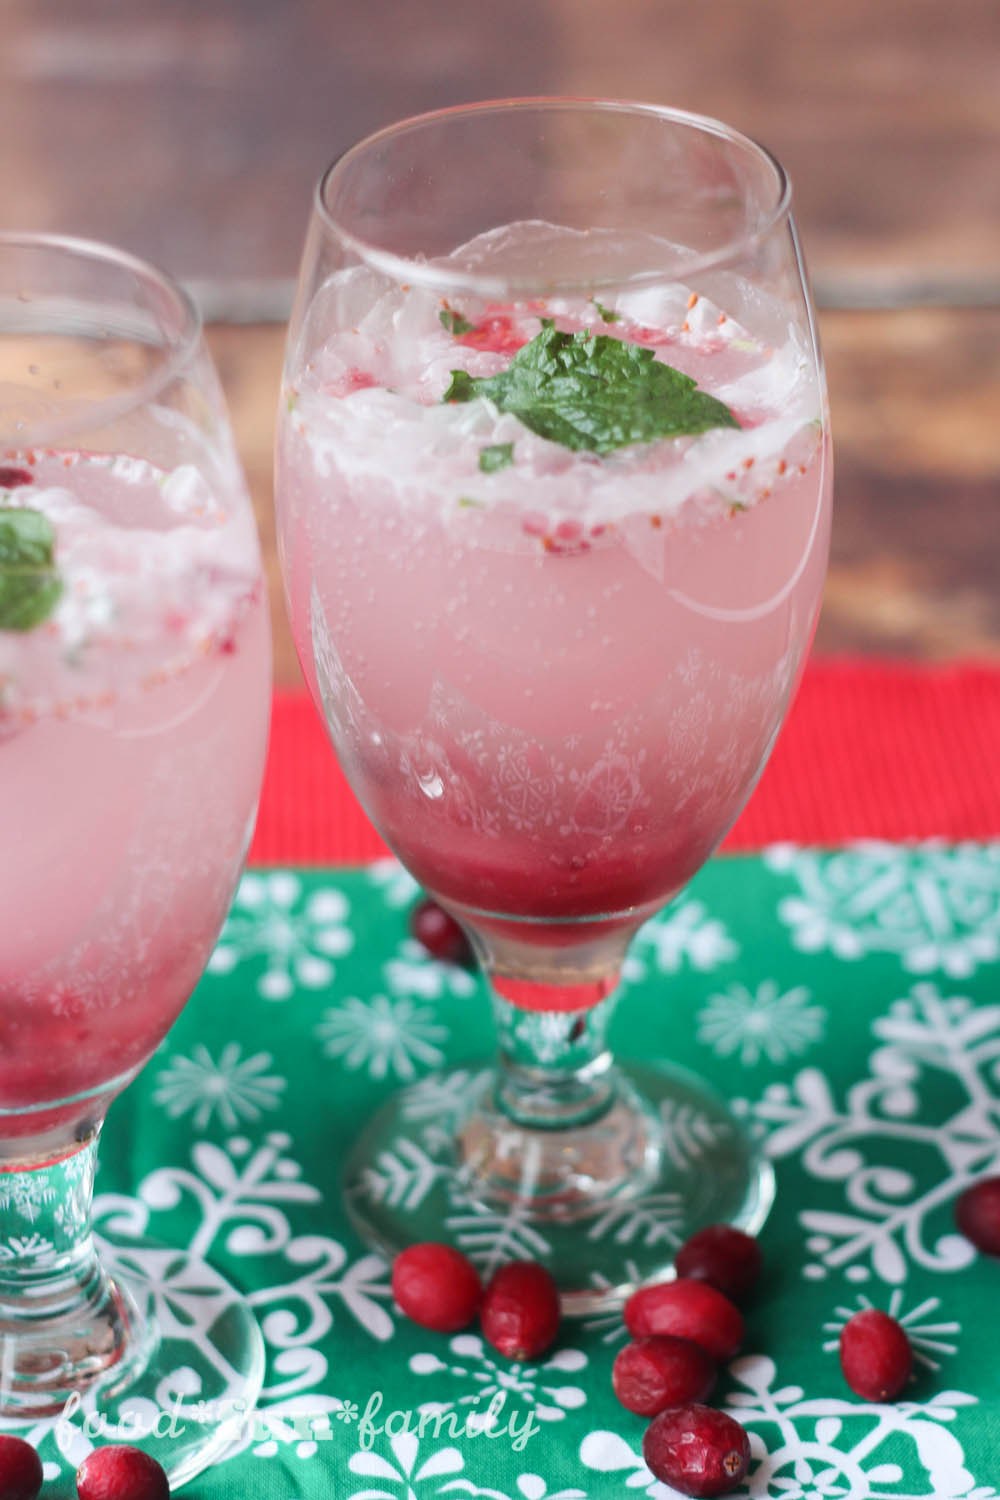 New Year's Eve mocktails for kids: Sparkling cranberry mint mocktail | Food Fun Family